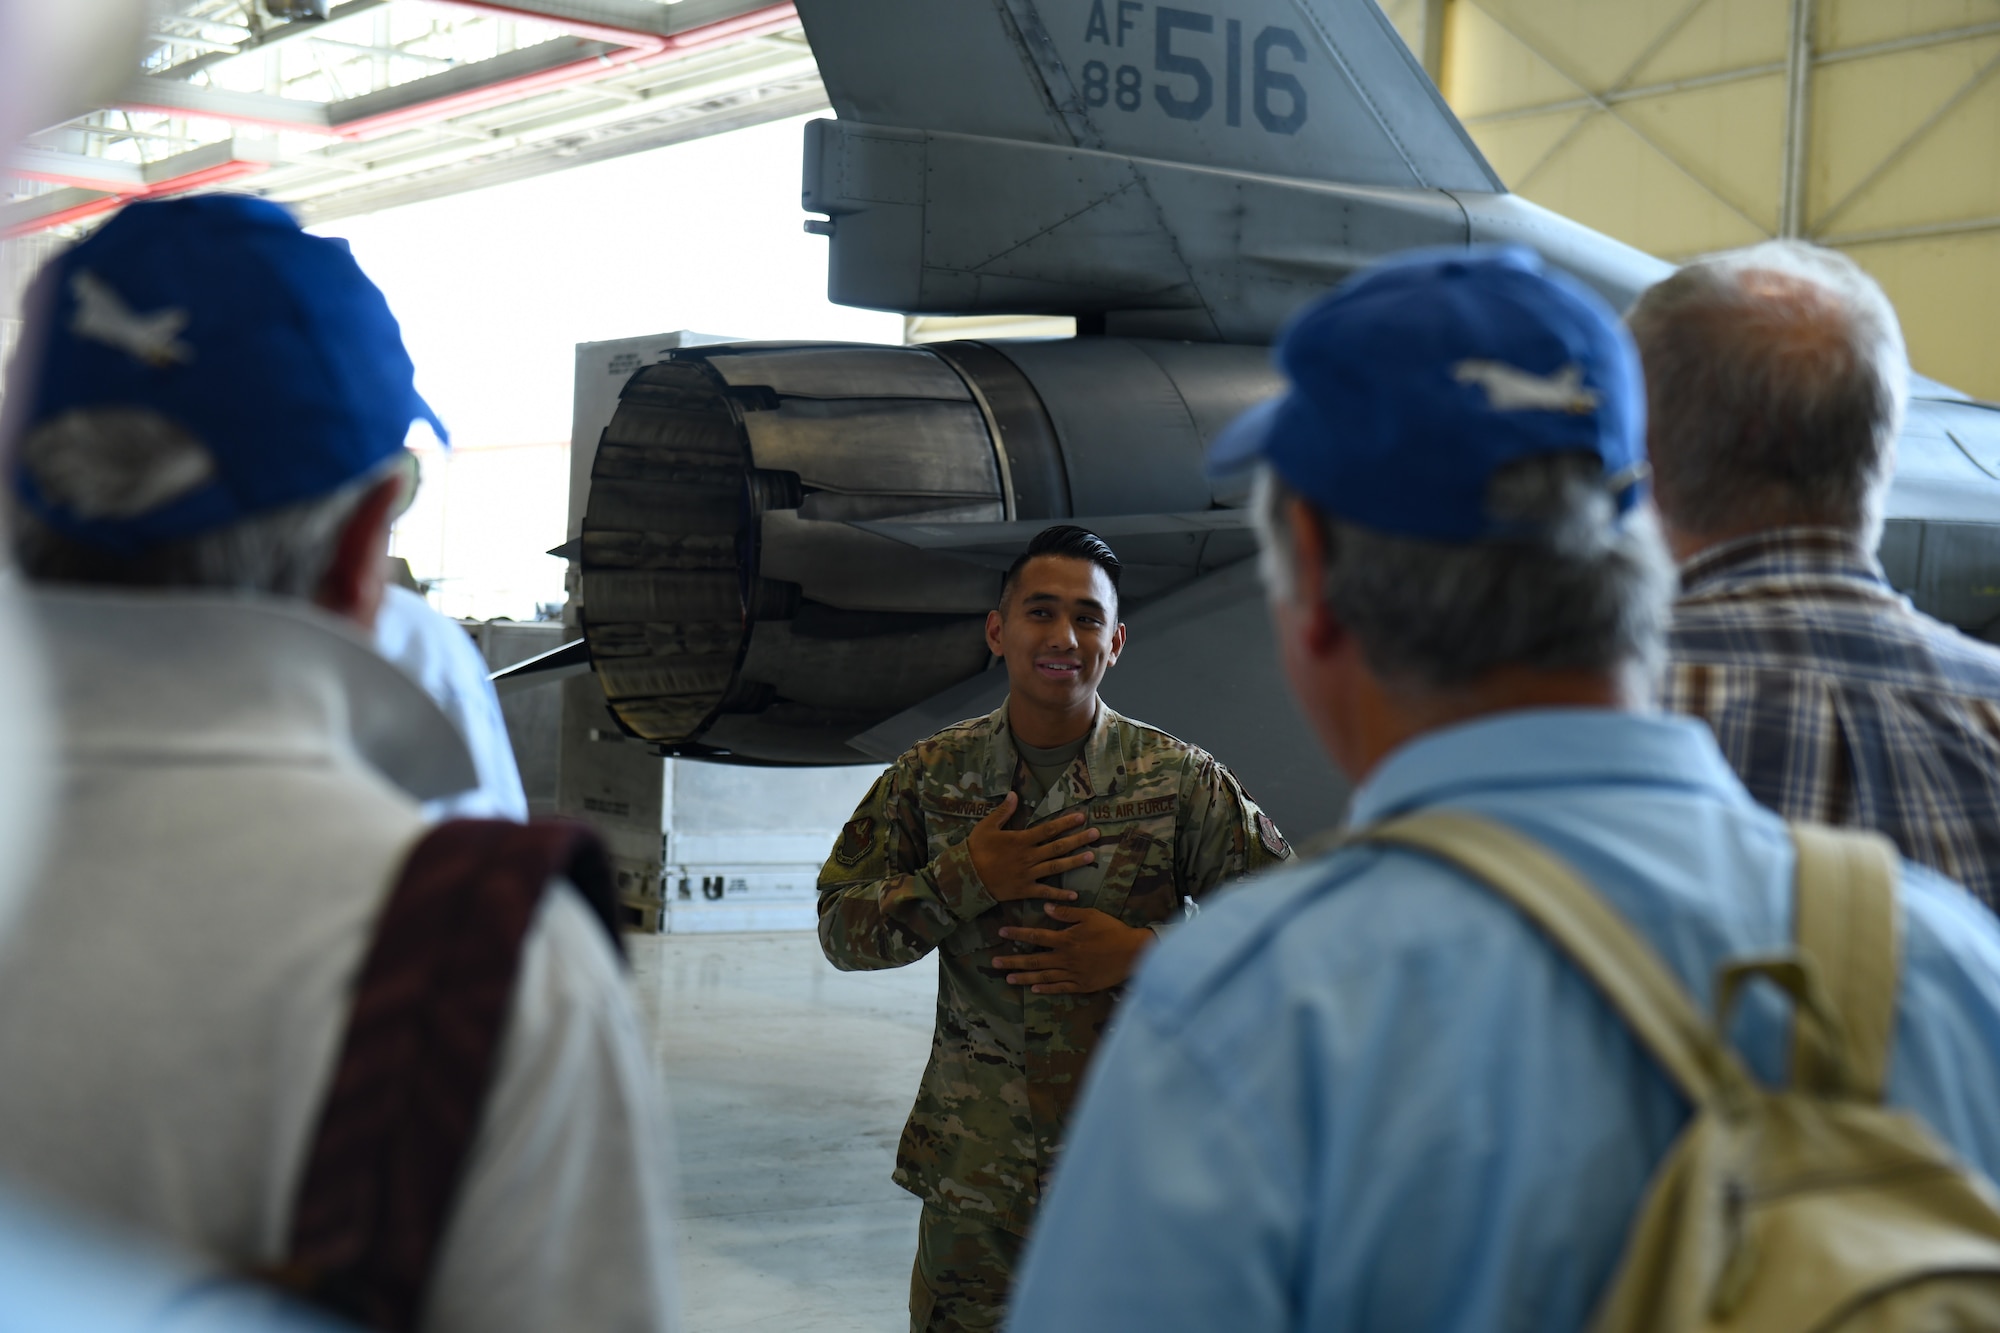 Click here for information on touring Aviano Air Base